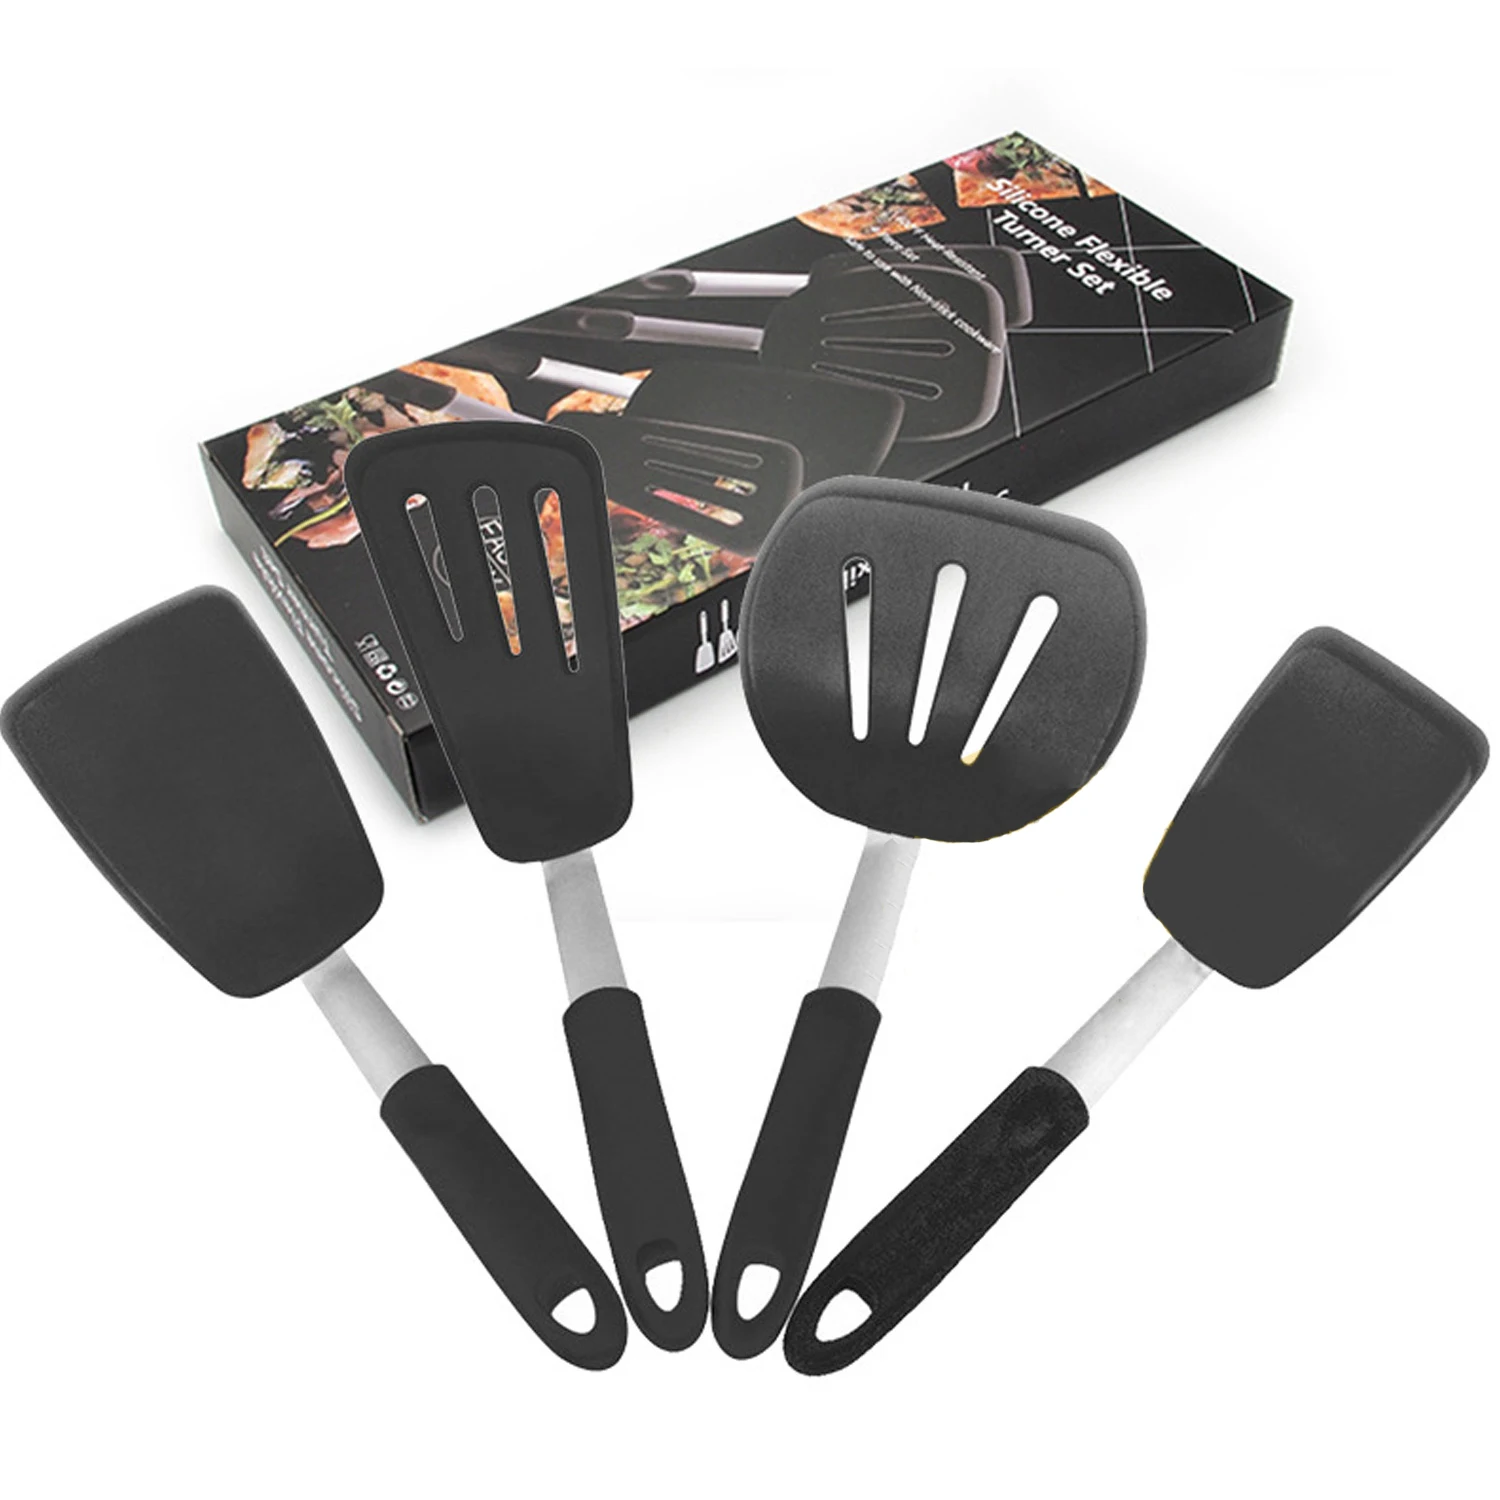 

Best Heat Resistant 4 Piece Silicone Cooking Utensil Pancake Slotted Turner Spatula Set, Silver